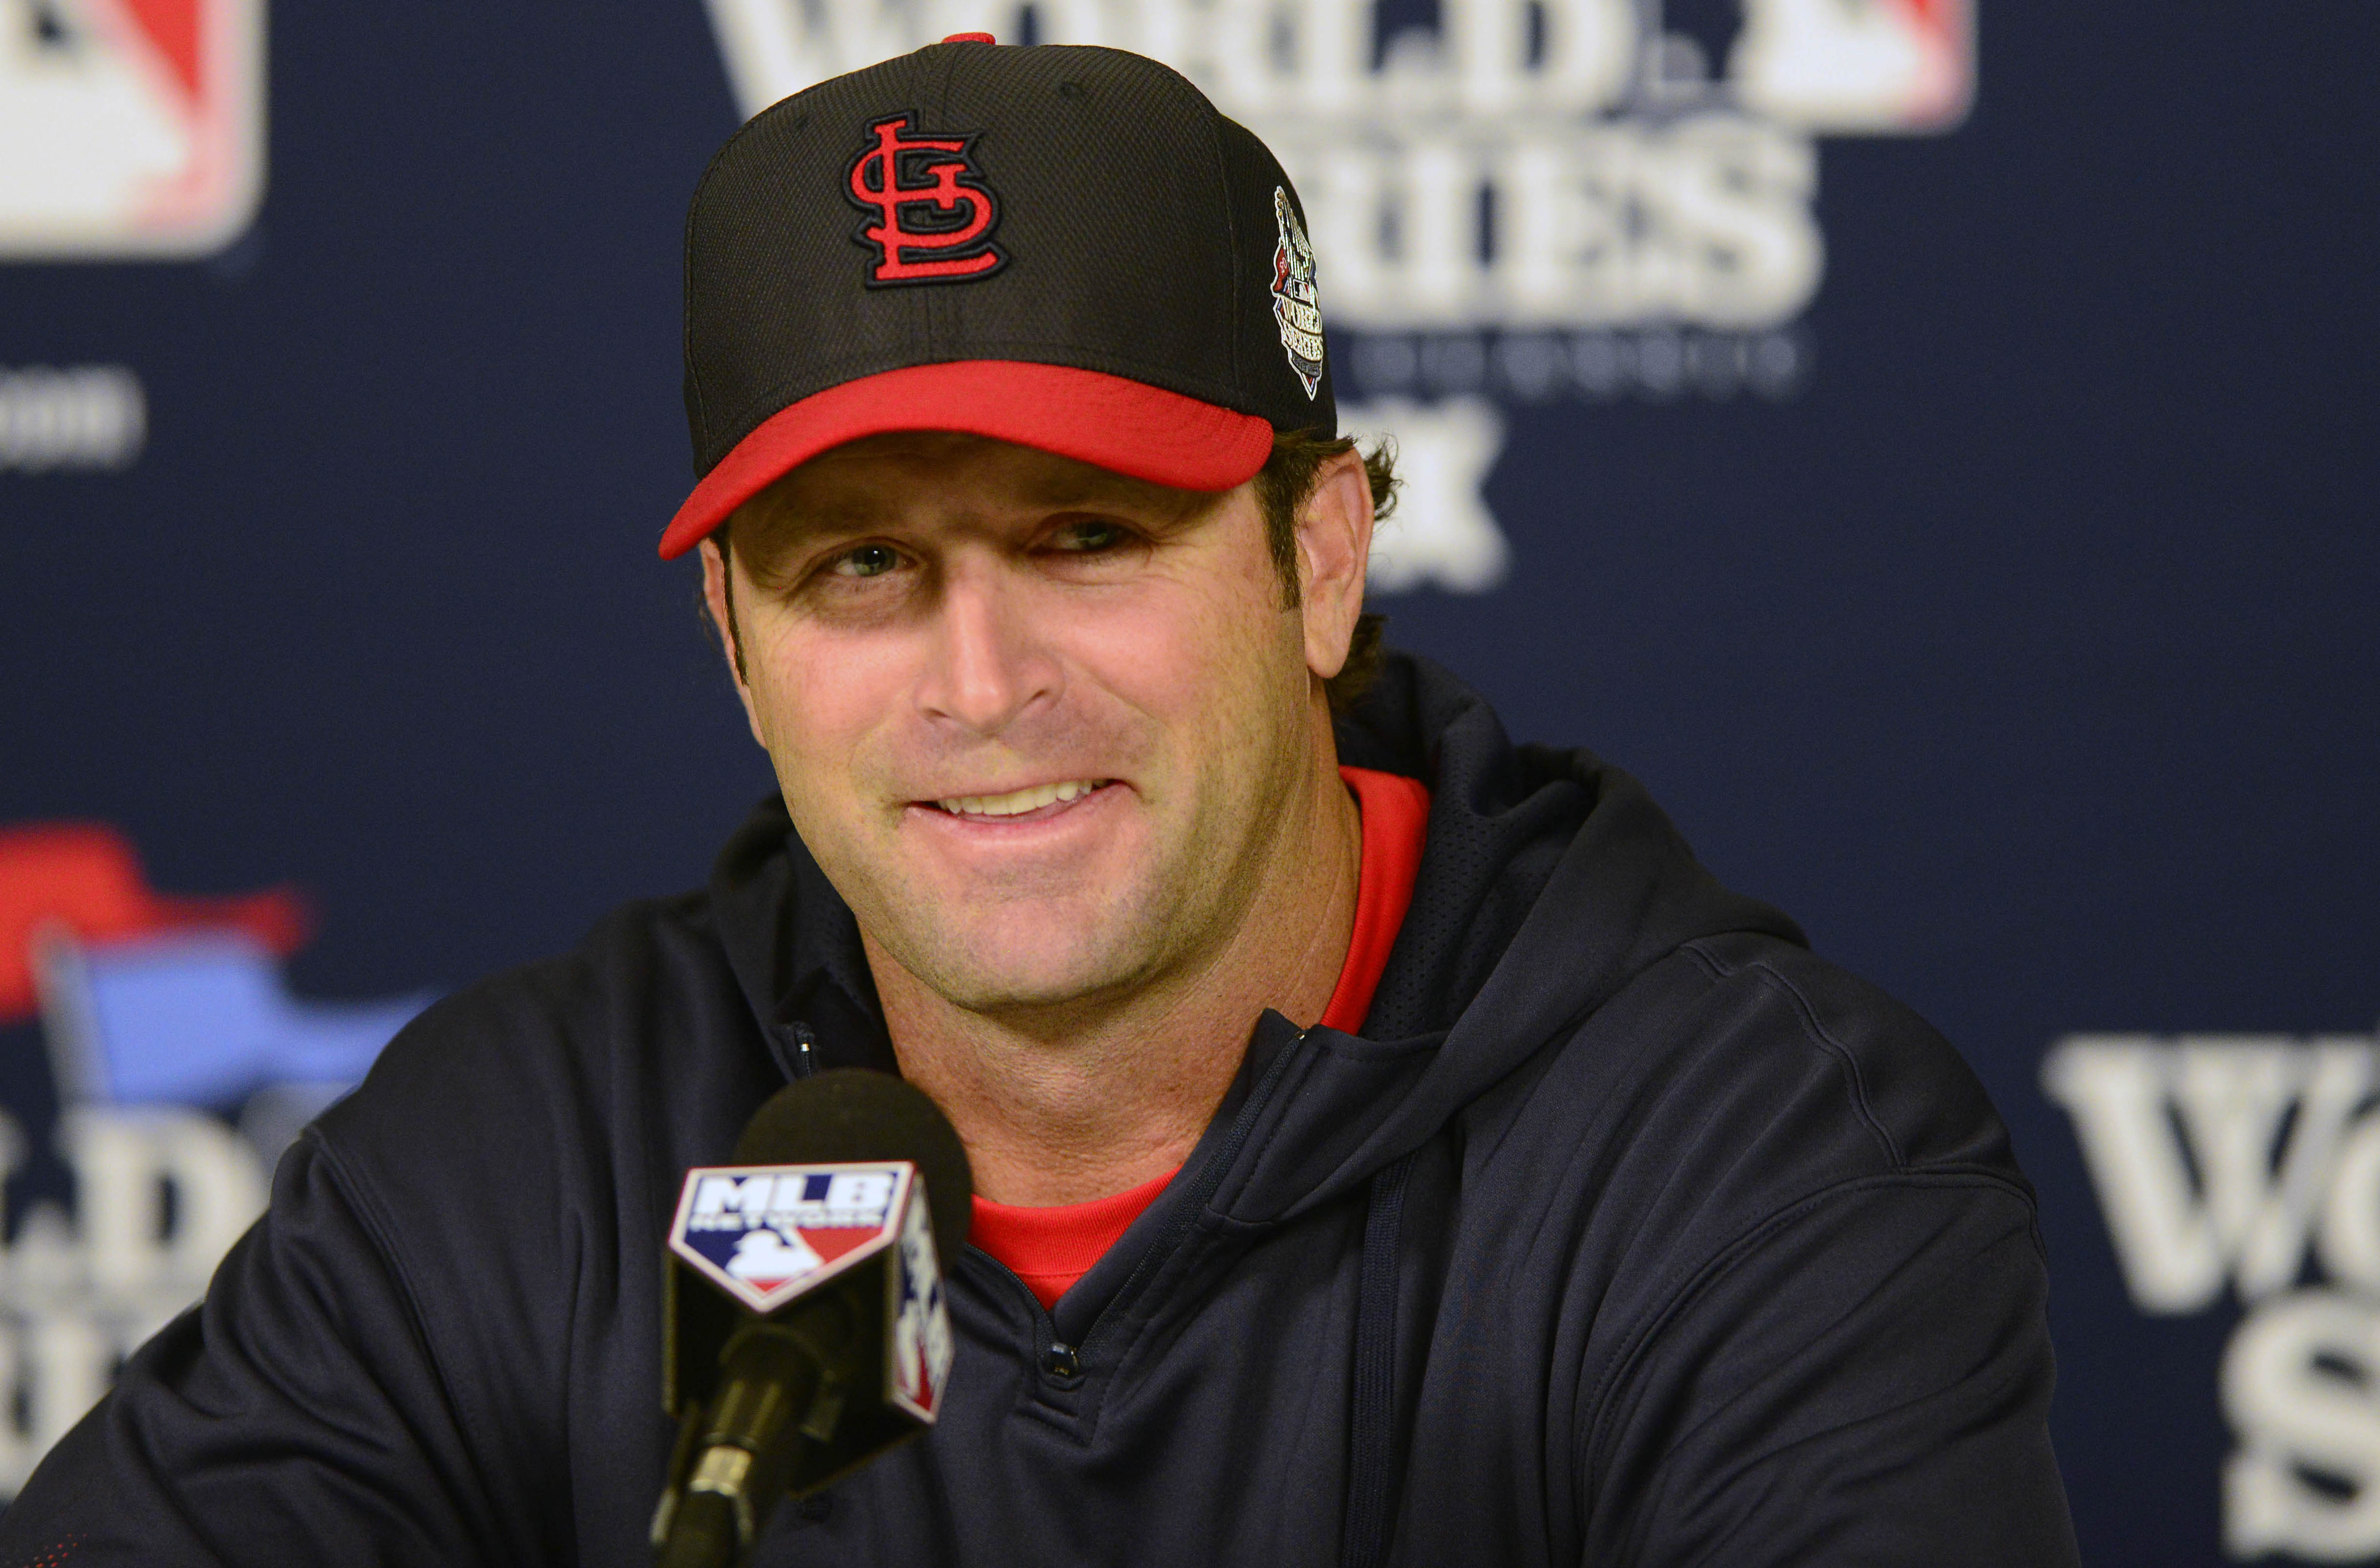 Mike Matheny named 'Most Handsome Manager